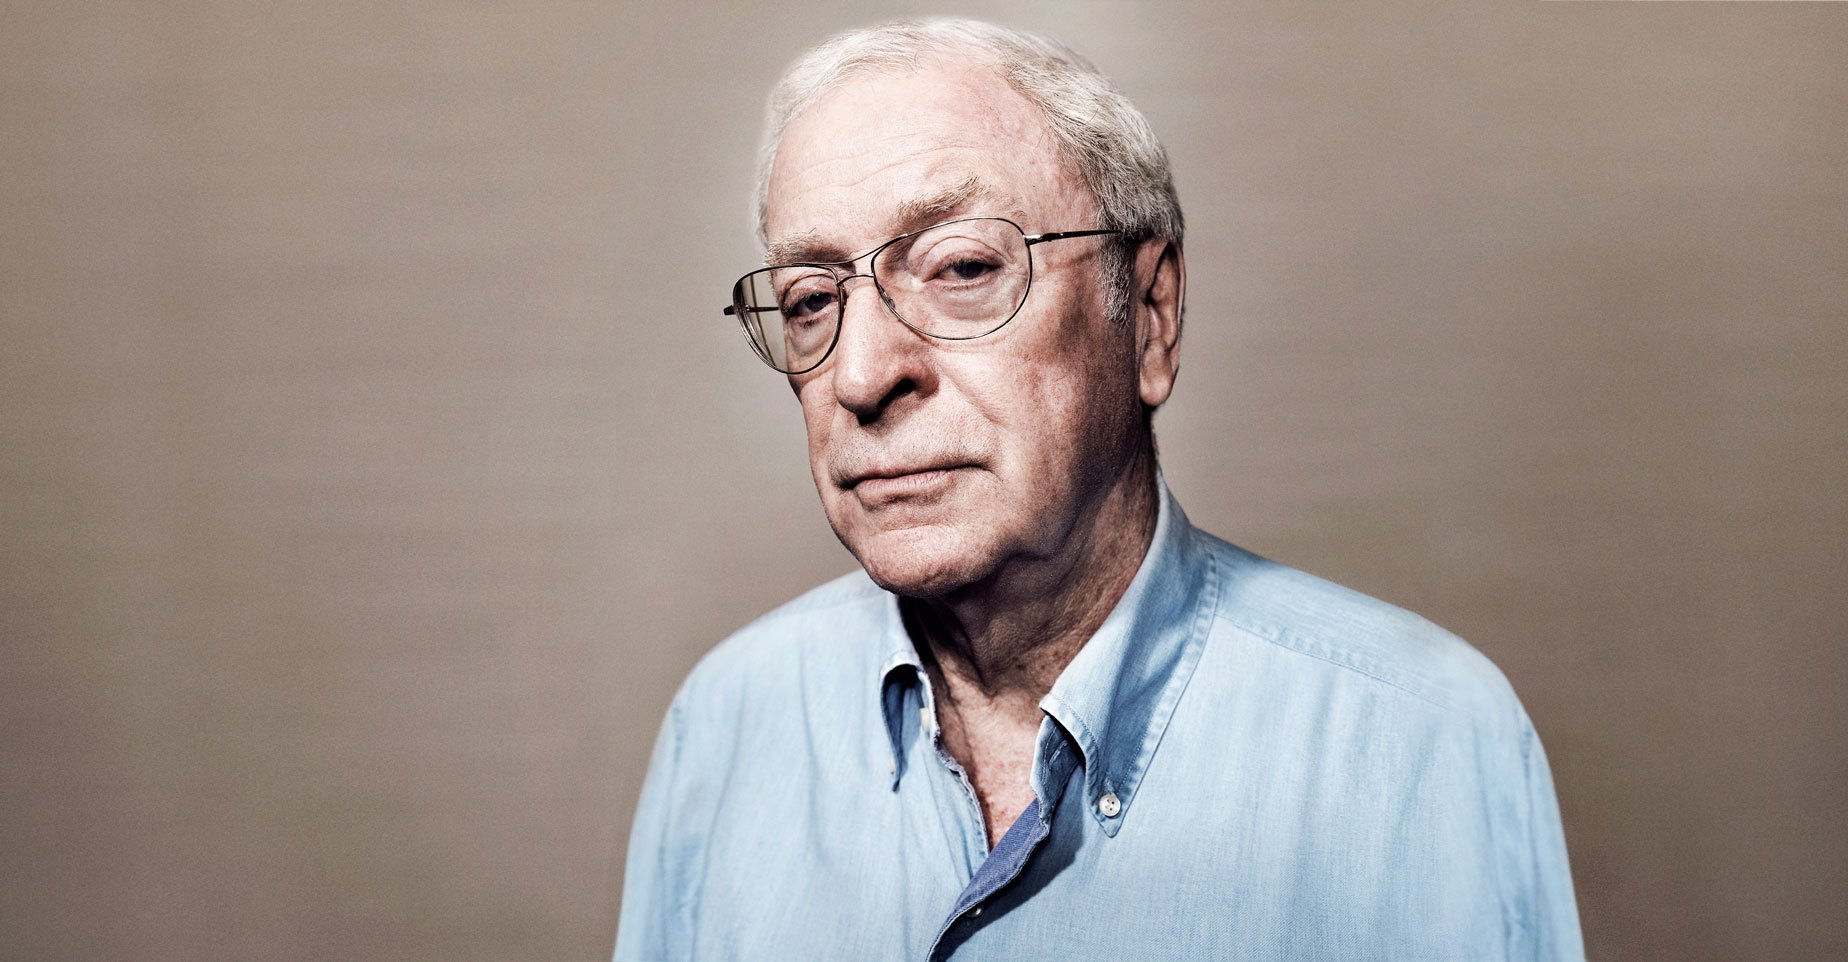 Happy 84th Birthday to actor Sir Michael Caine! 